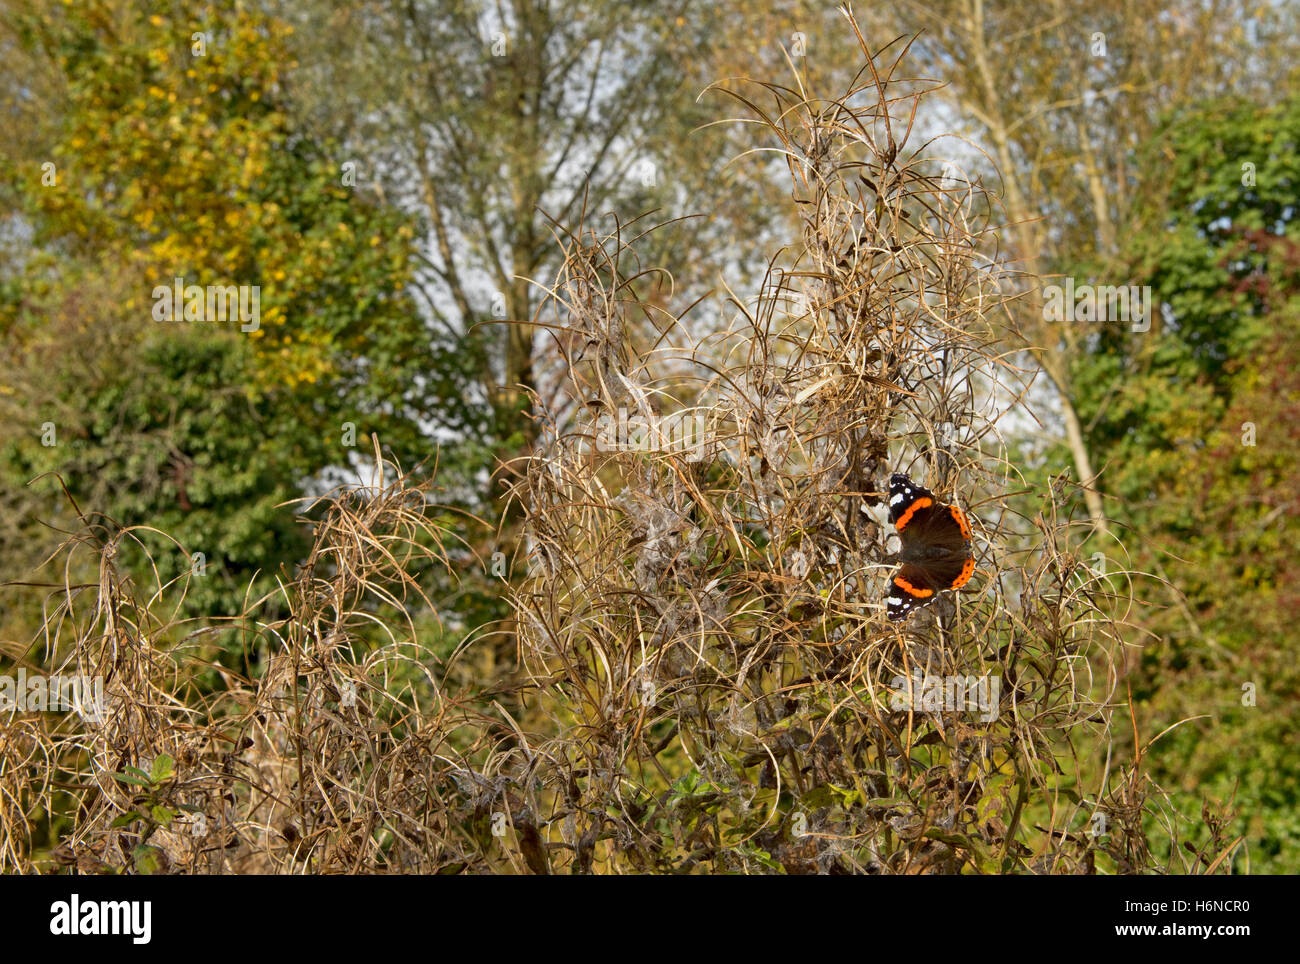 A red admiral butterfly, Vanessa atalanta, in October sunshine on seeding greater willowherb Stock Photo